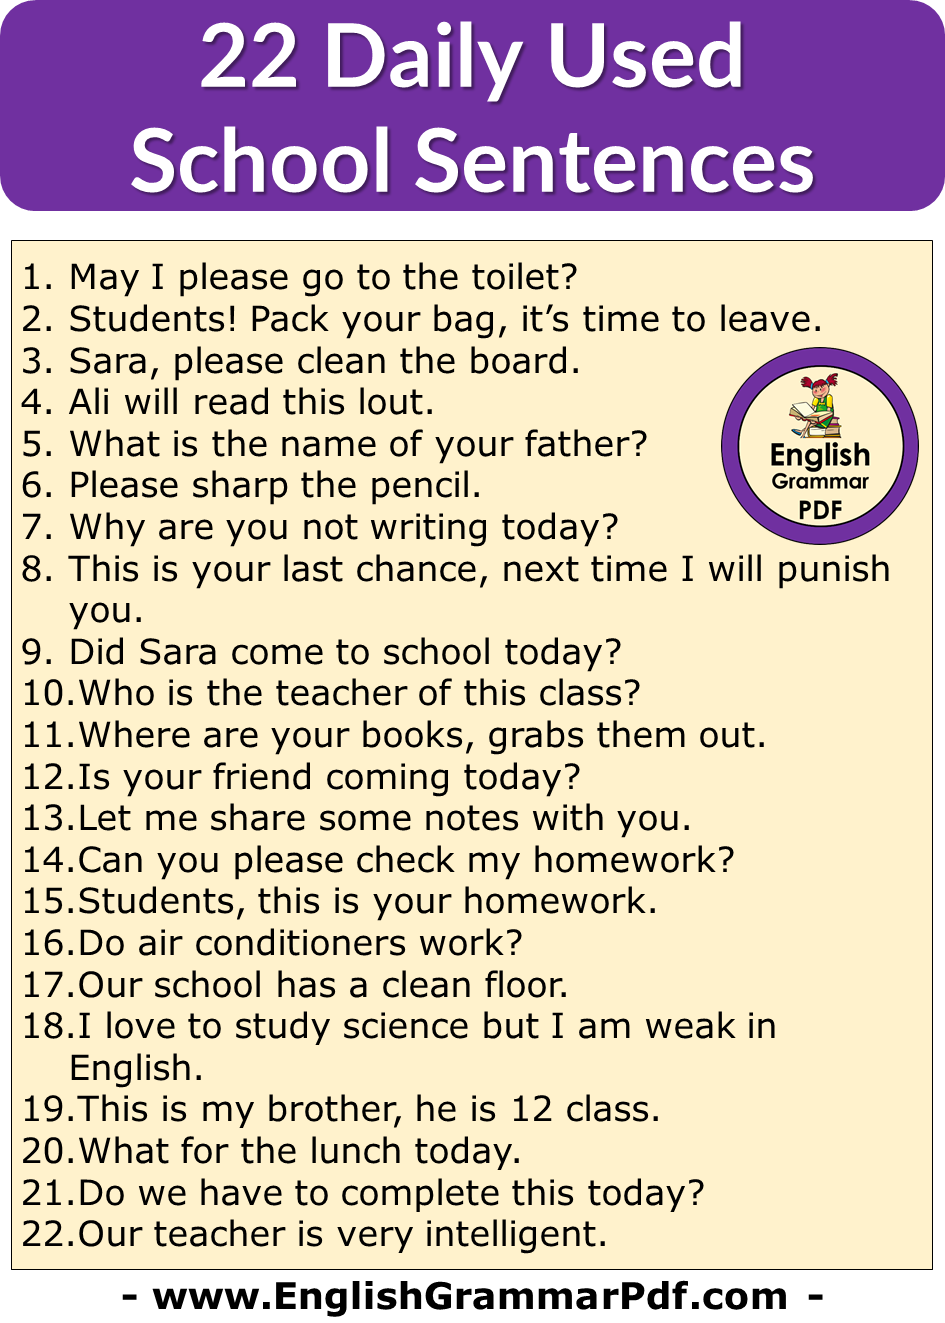 22 Daily Use English Sentences in School, Classroom English Phrases Examples